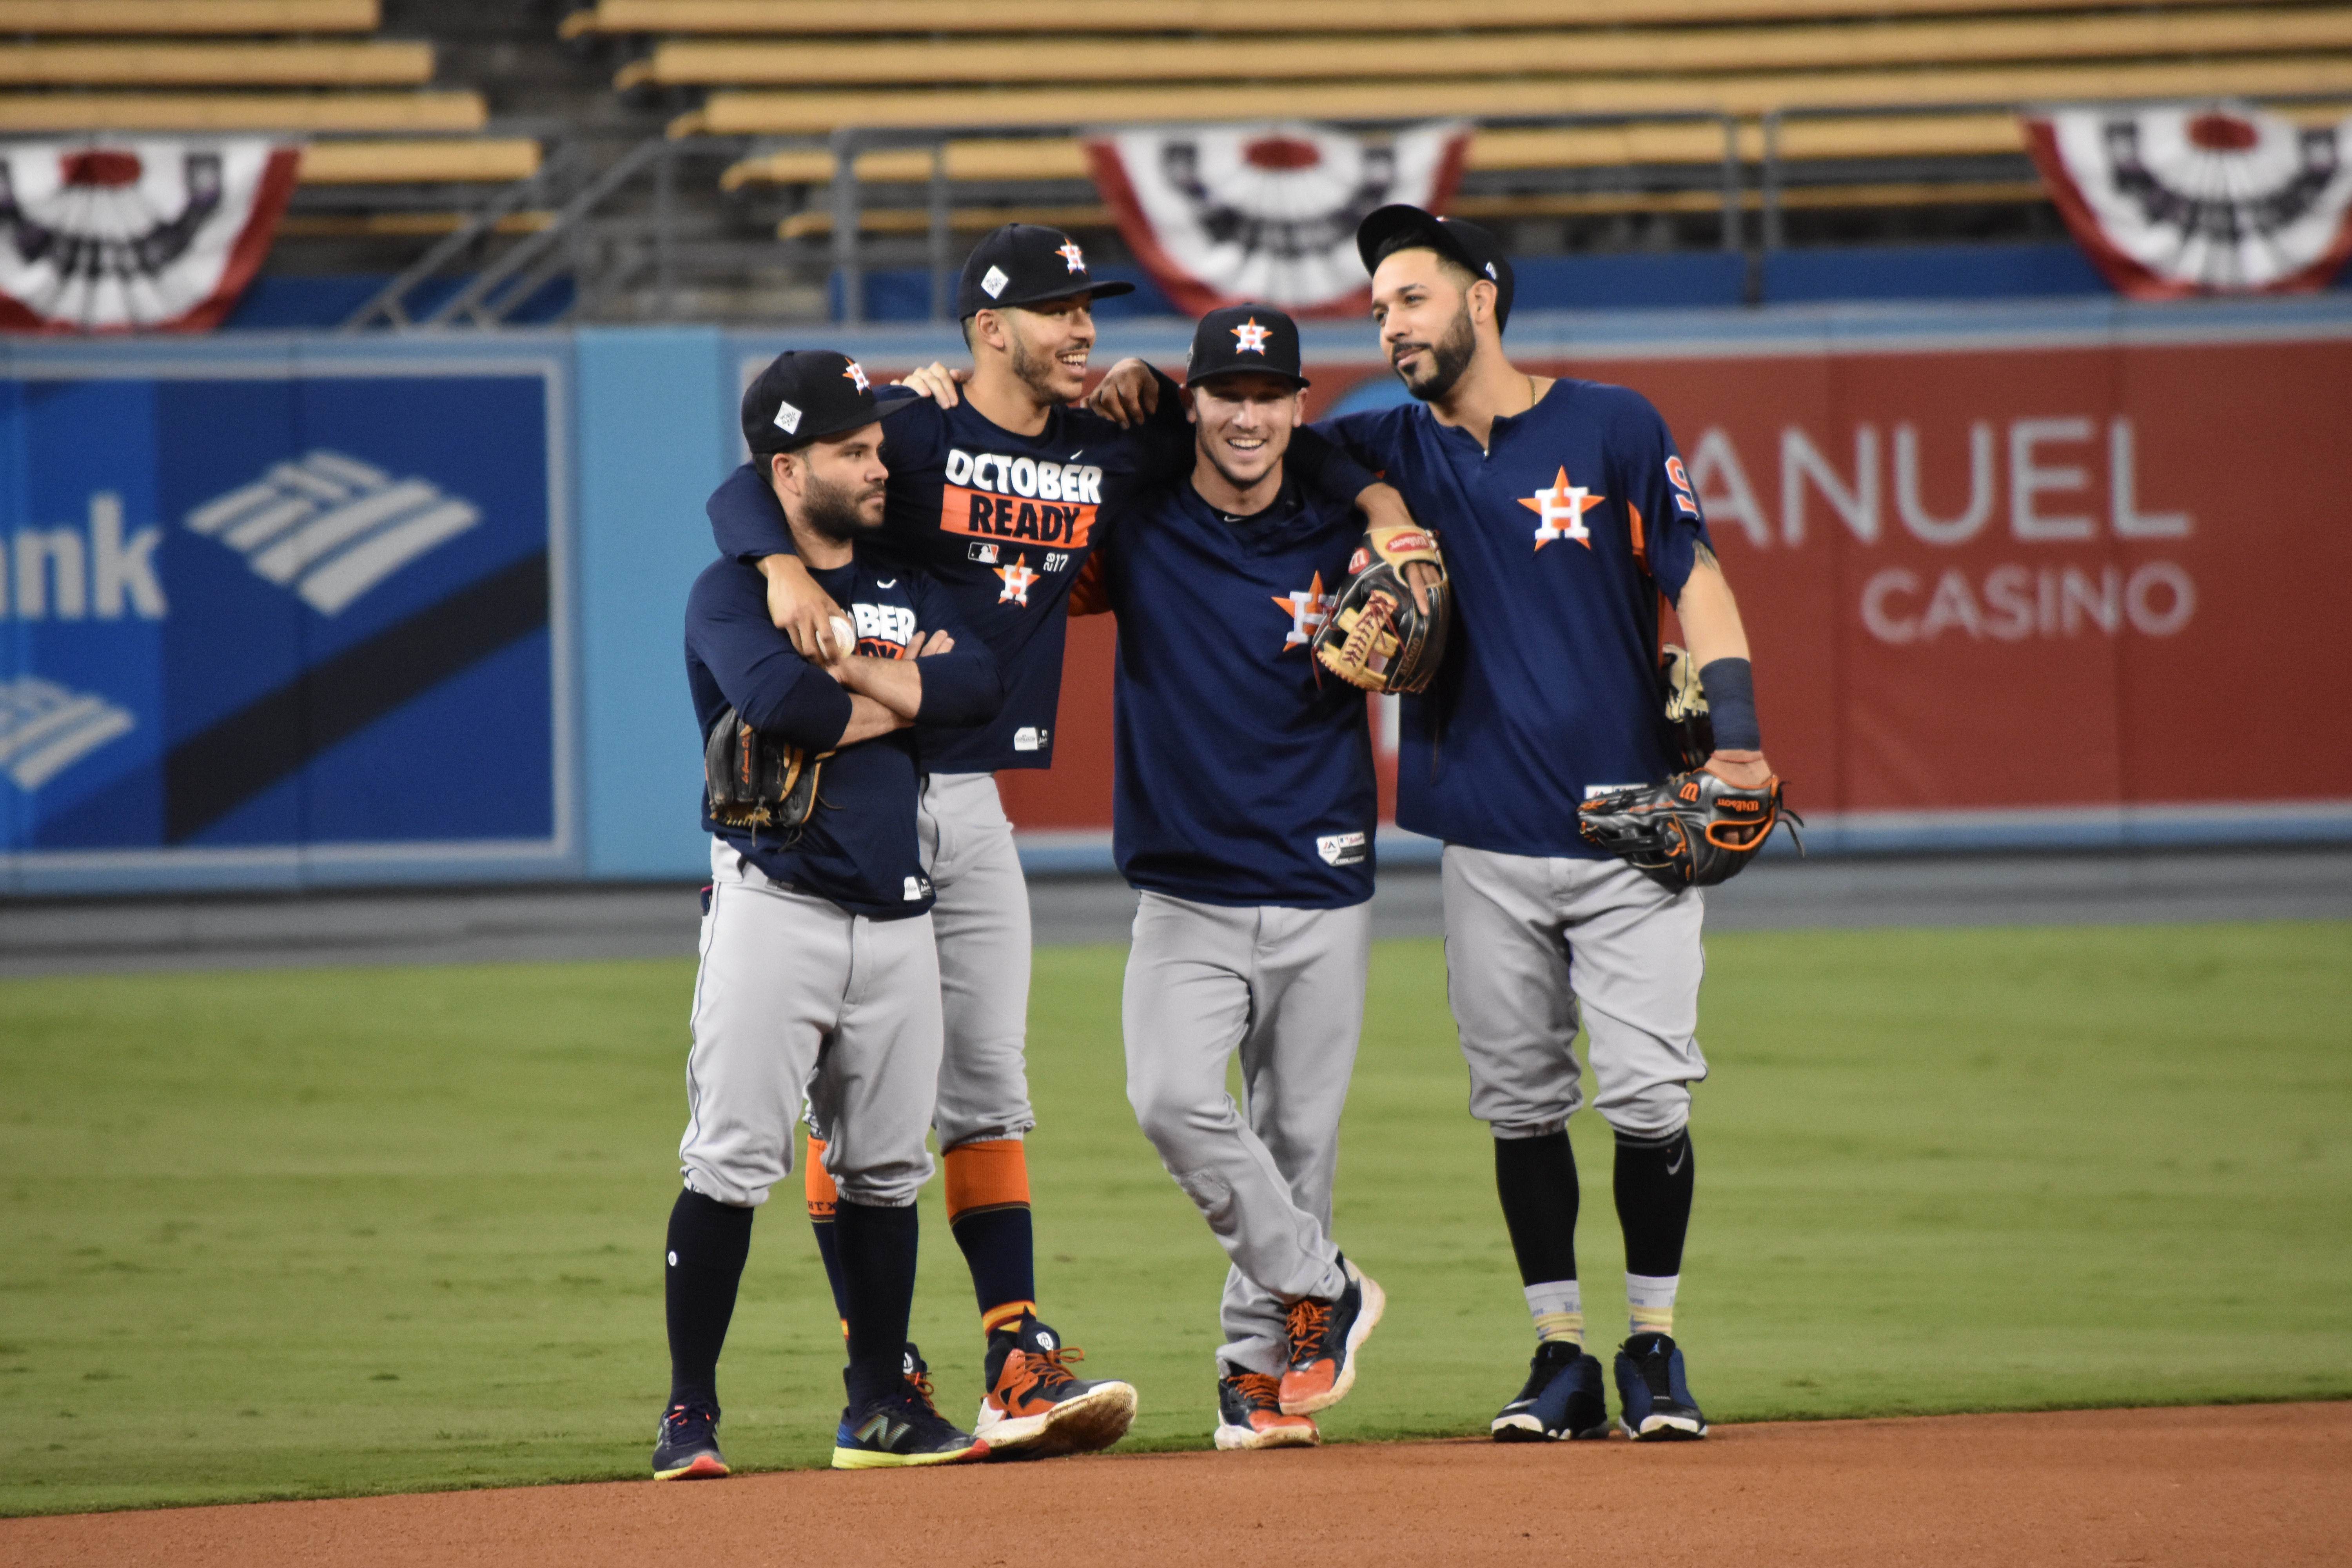 Brotherly bond: Astros' Jose Altuve, Carlos Correa inseparable on and off  field